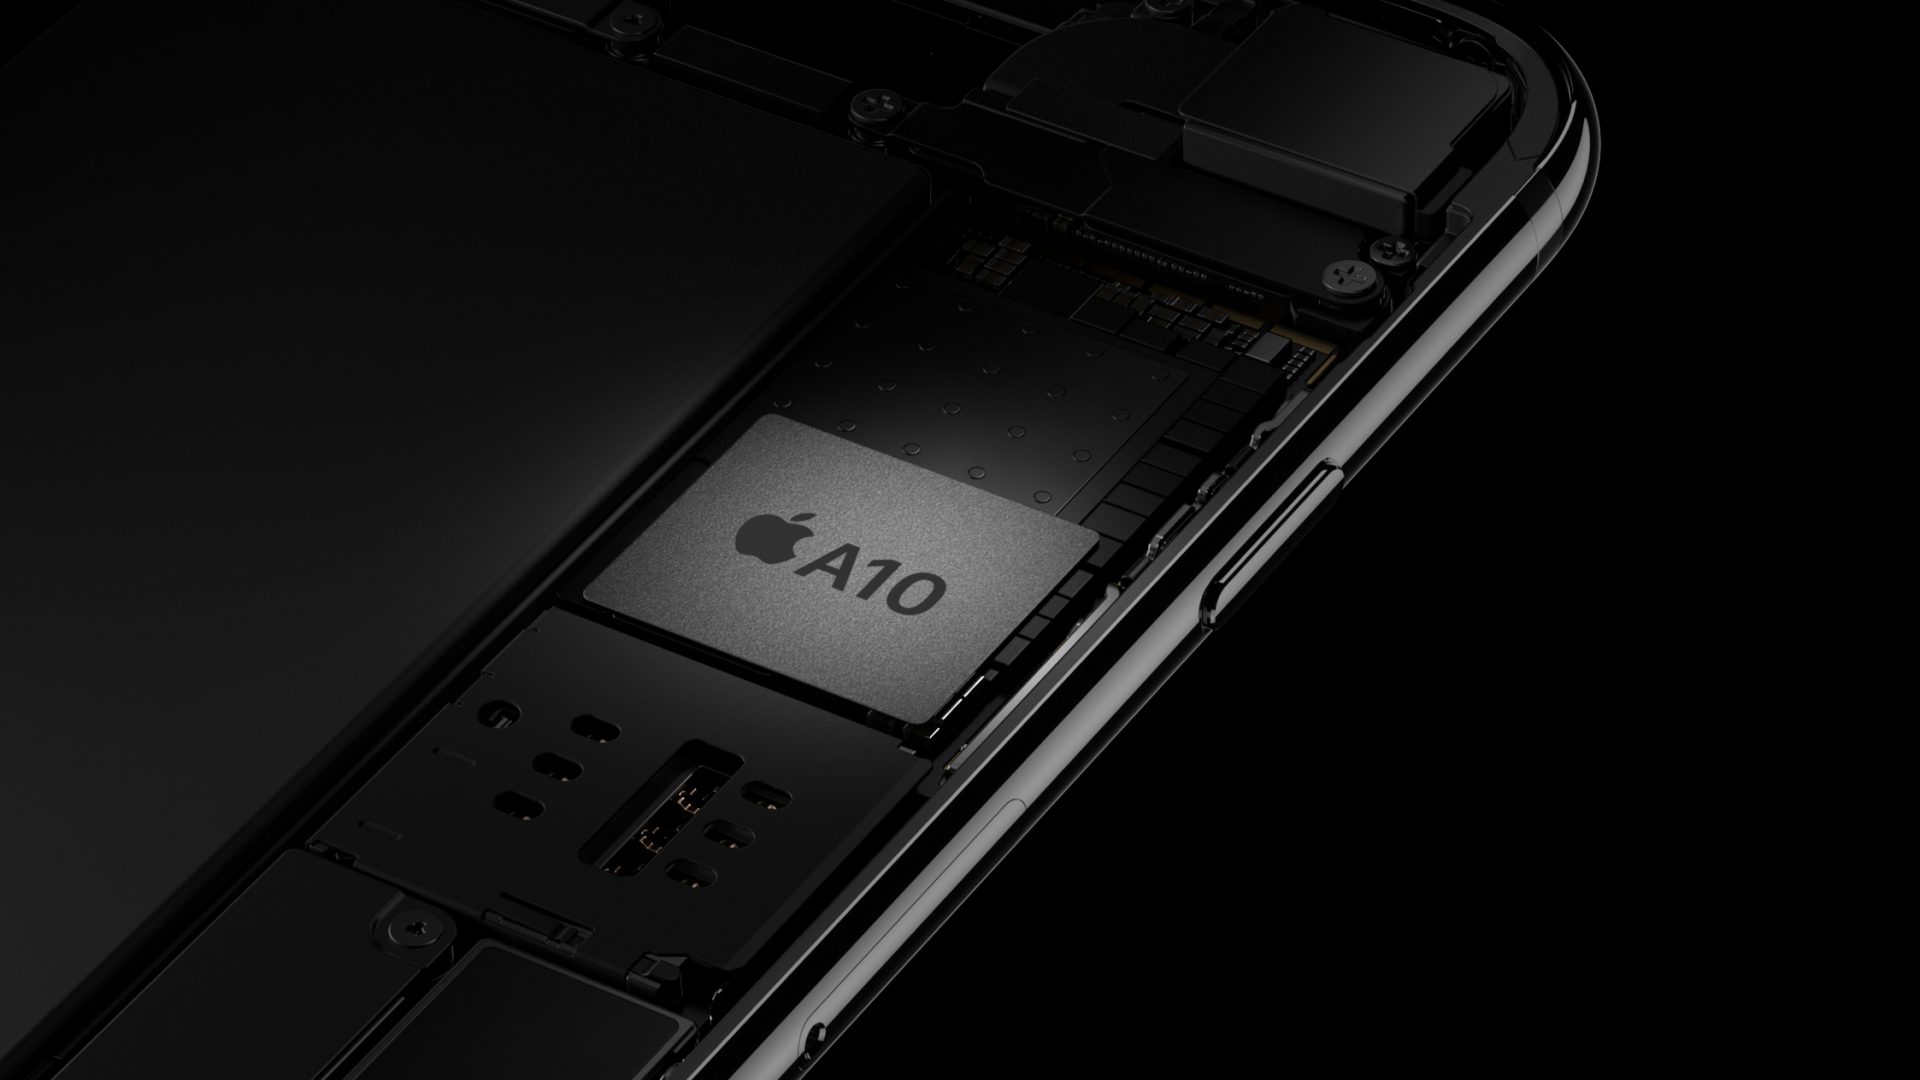 Apple A10 Fusion chipset for iPhone 7